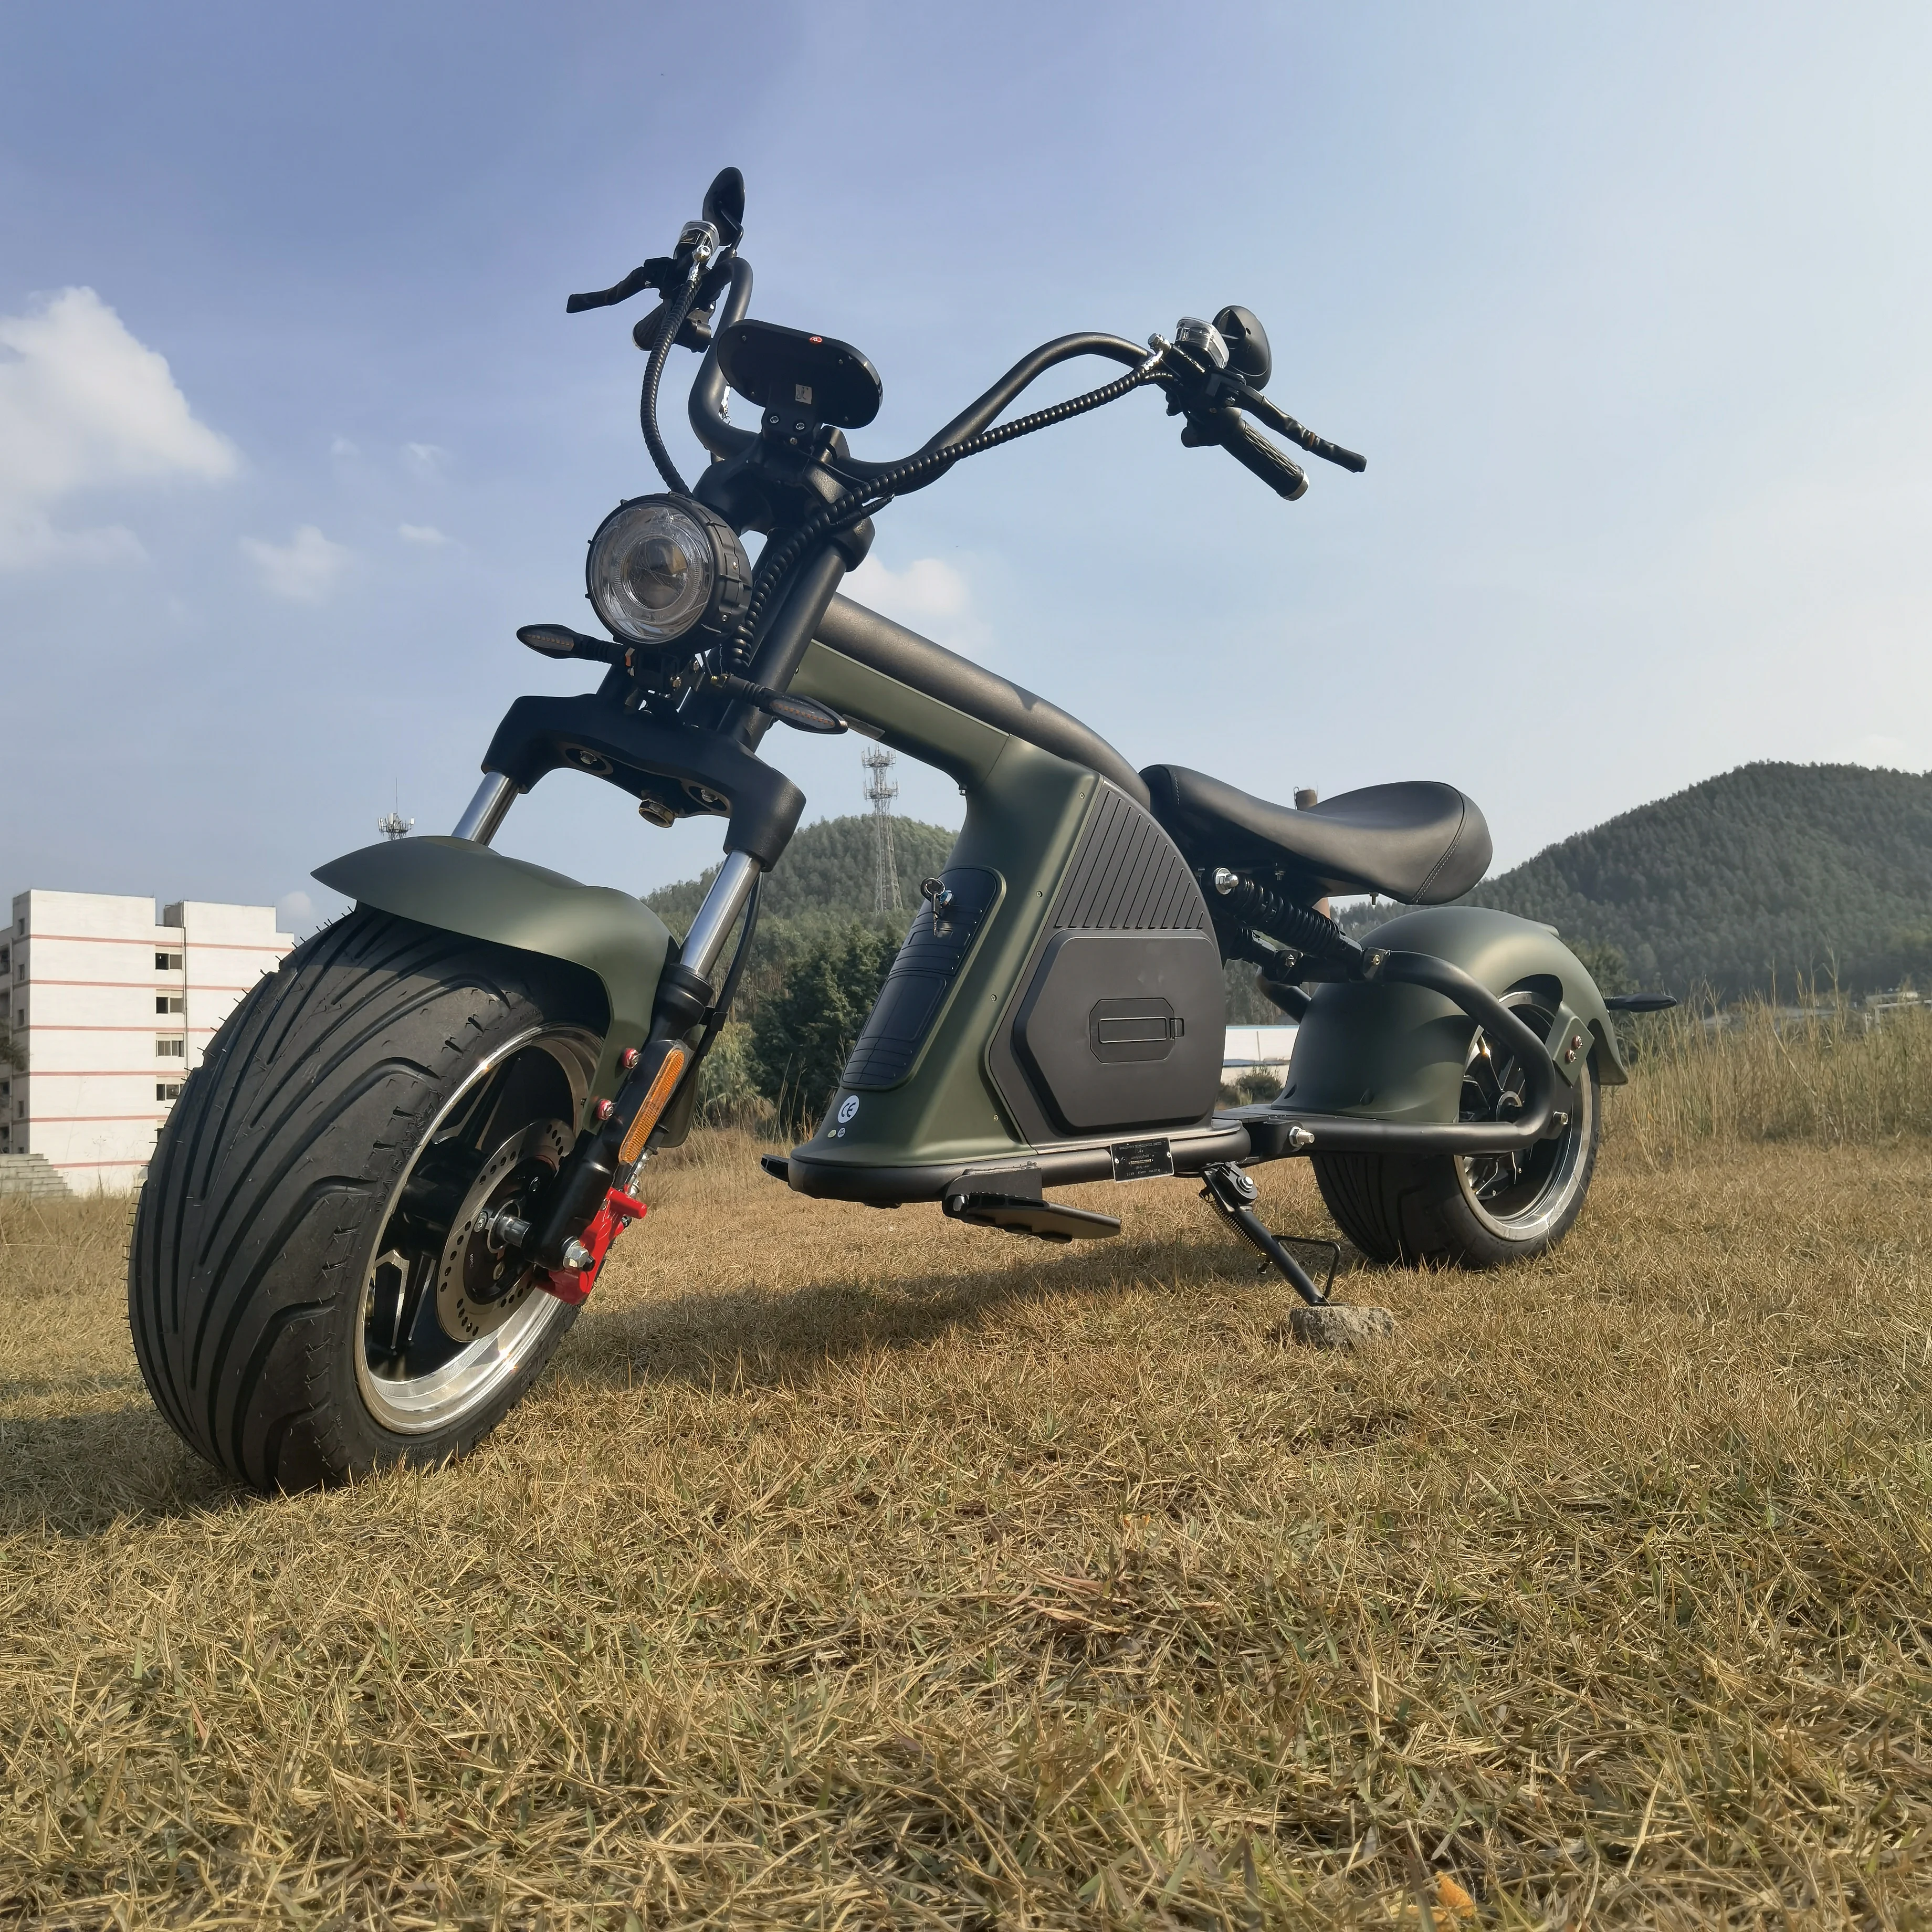 

Amoto eu warehouse stock M8 new model 2000w eec coc electric motorcycle scooter citycoco